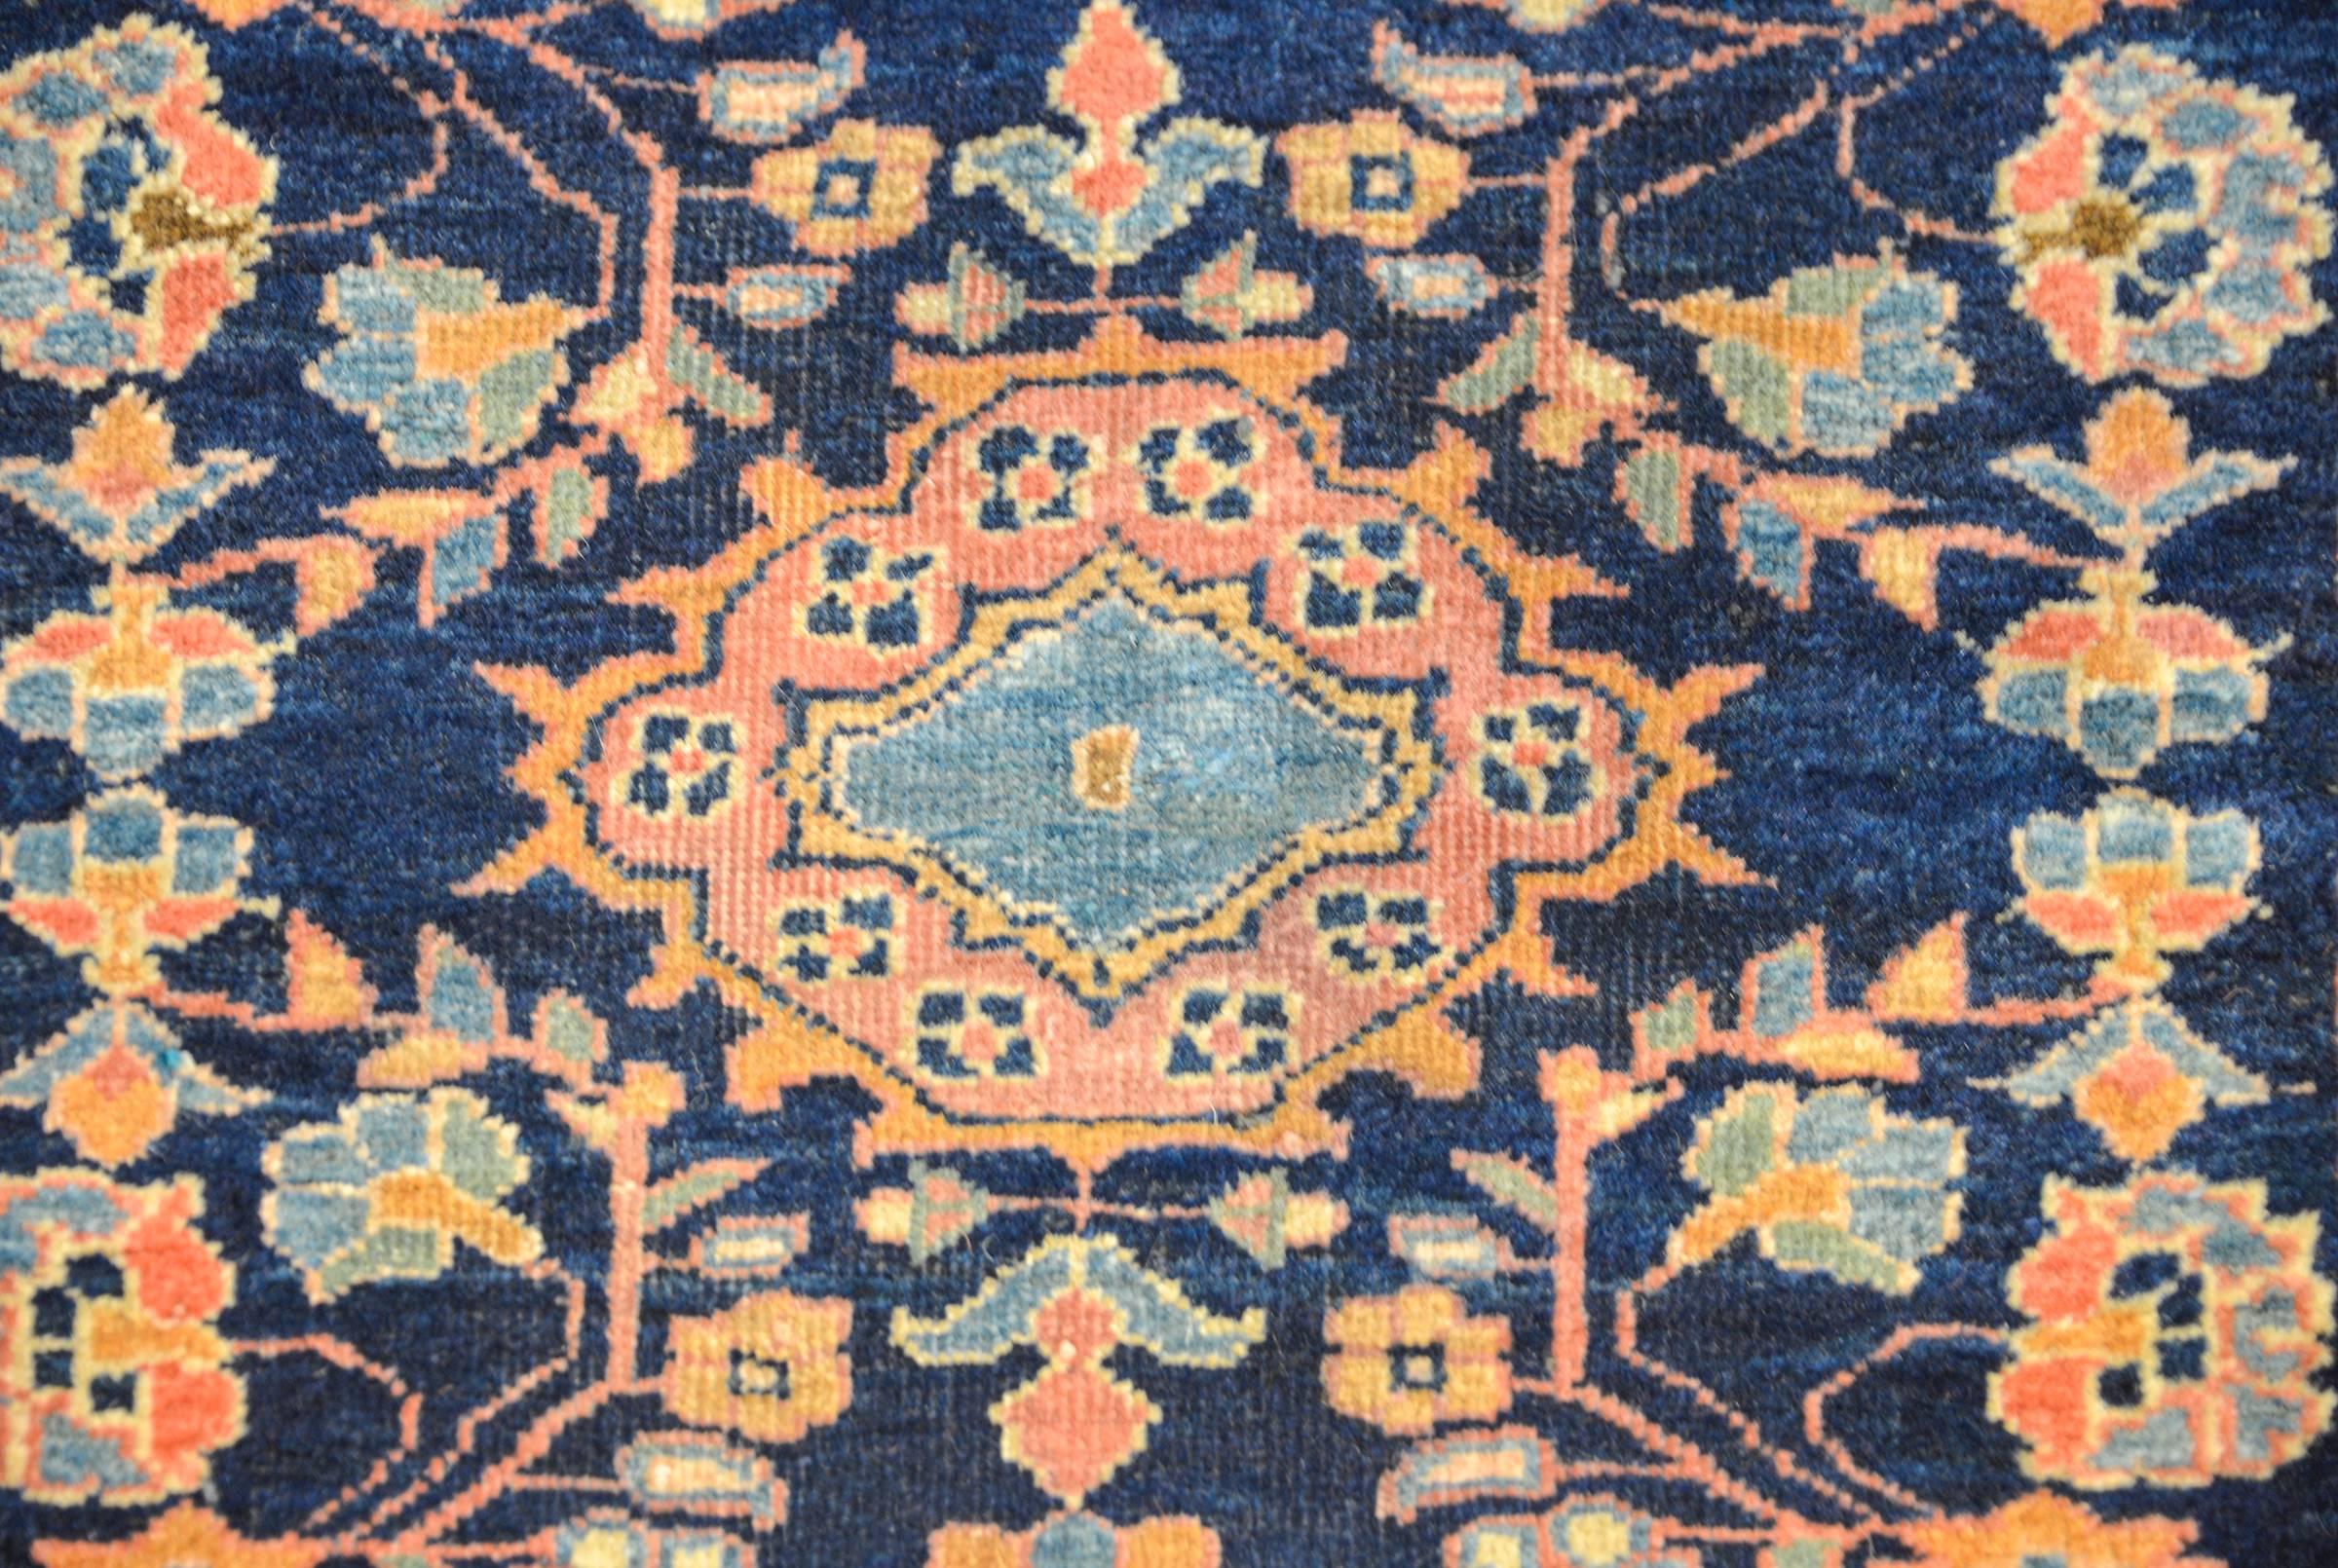 A fantastic 19th century Persian Sarouk Mohajeran rug with a traditional pattern consisting of a mirrored floral pattern woven in multicolored vegetable dyed wool on a dark indigo background. The border is complementary with a large-scale floral and